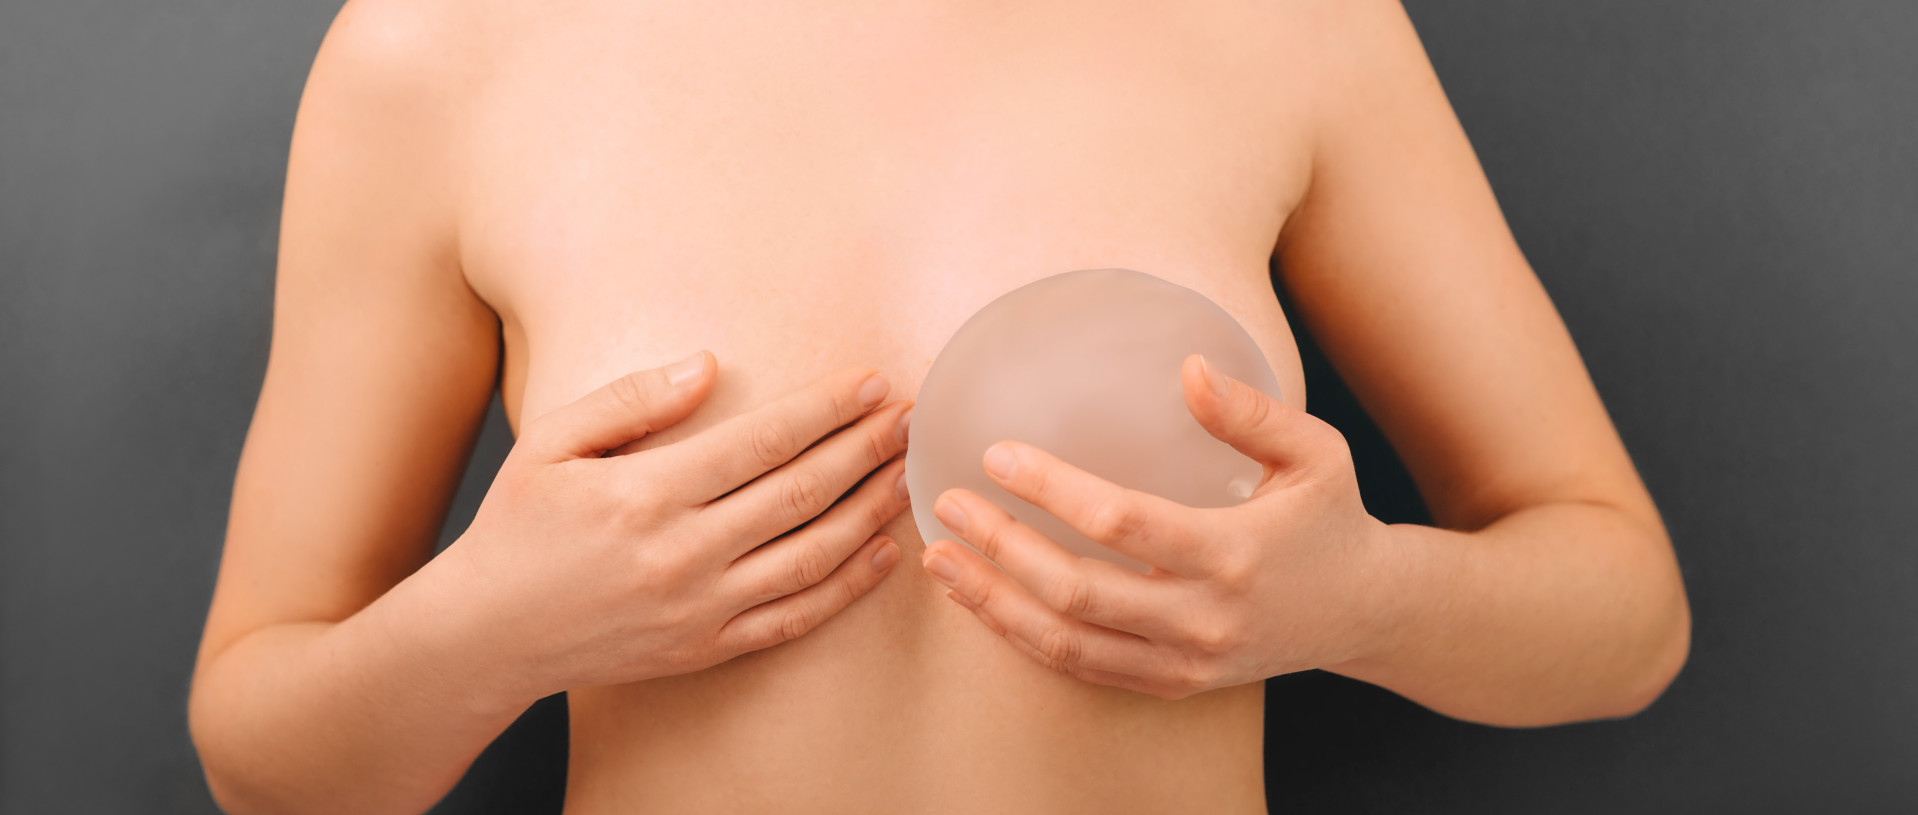 woman holding breast silicone implants near the breast